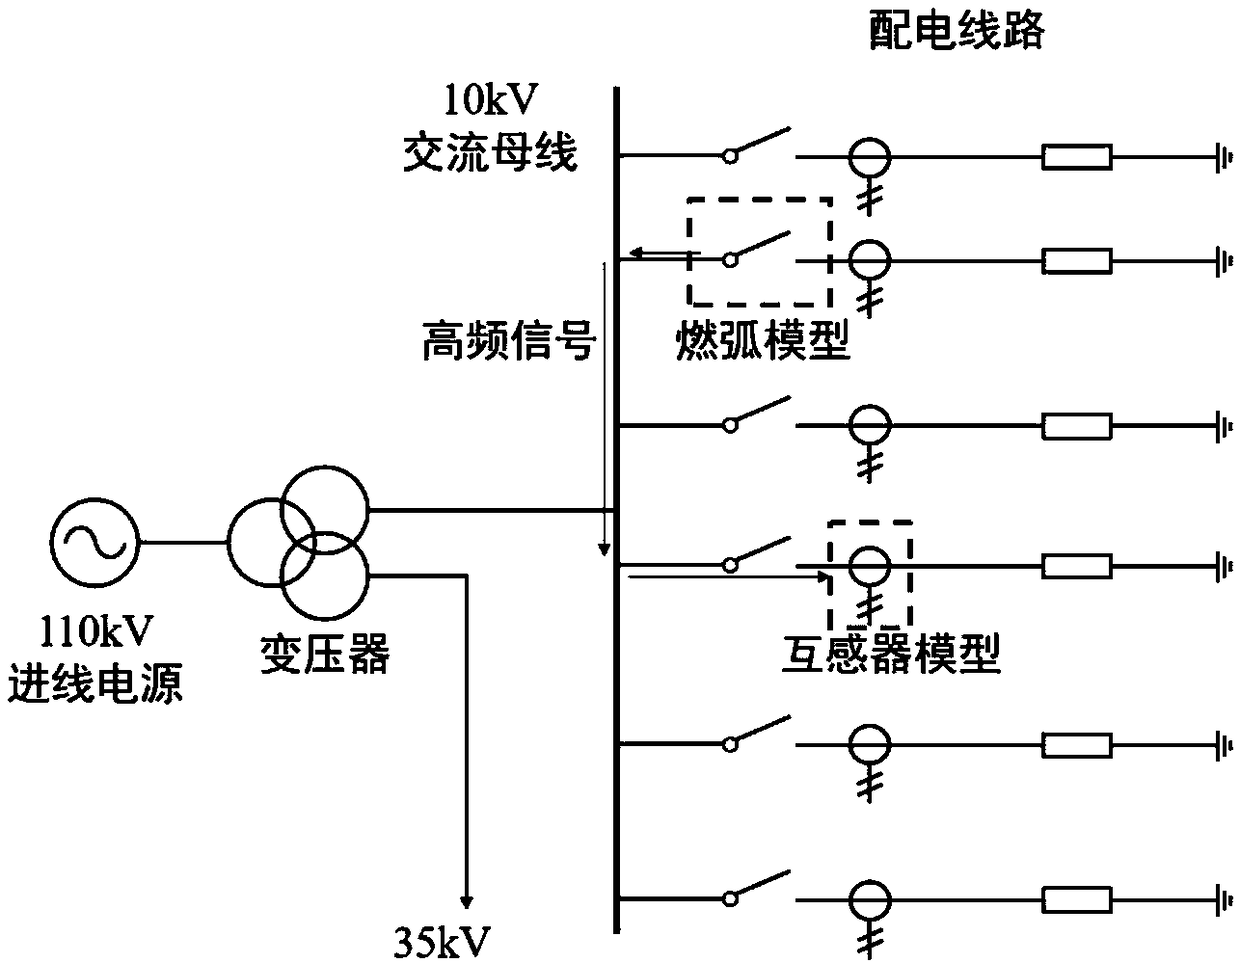 Power distribution network primary and secondary fusion intelligent switch high-frequency conduction interference test simulation method